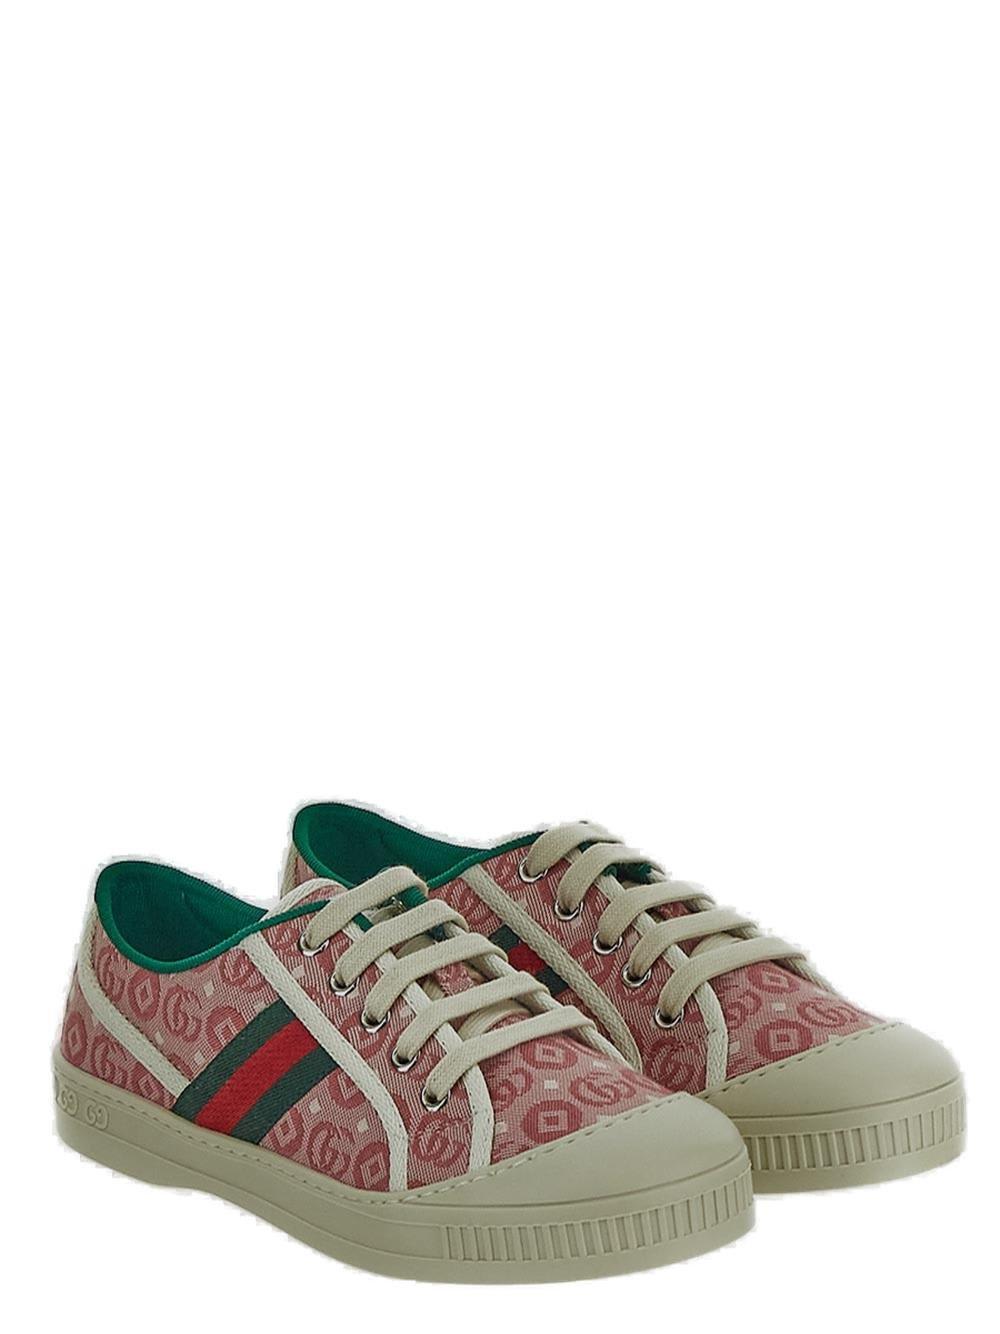 Gucci Kids' 1977 Tennis Lace-up Sneakers